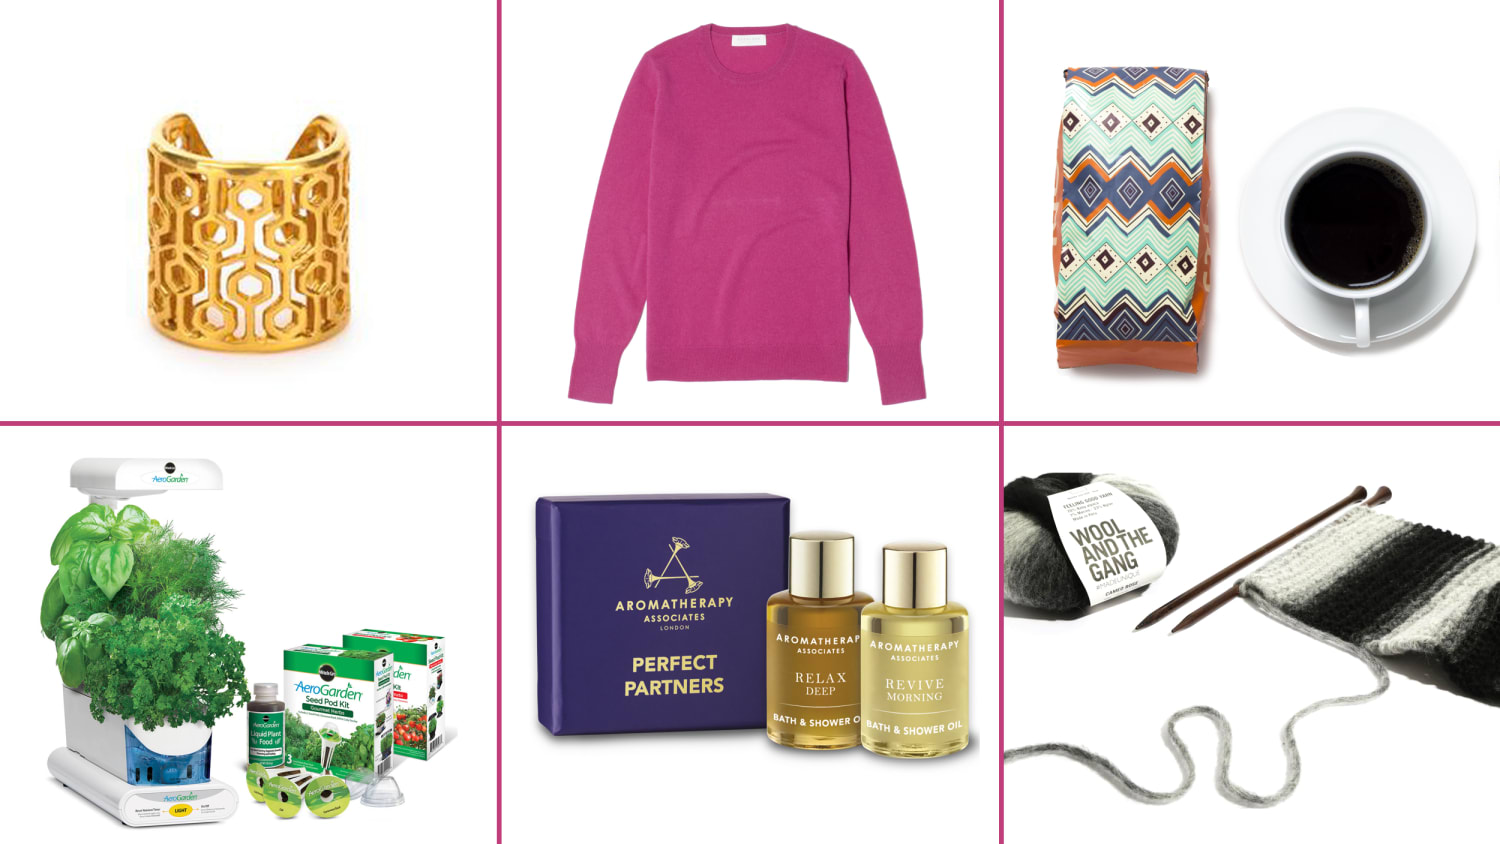 Top gifts for Christmas 2016: Gift ideas for mom from daughter